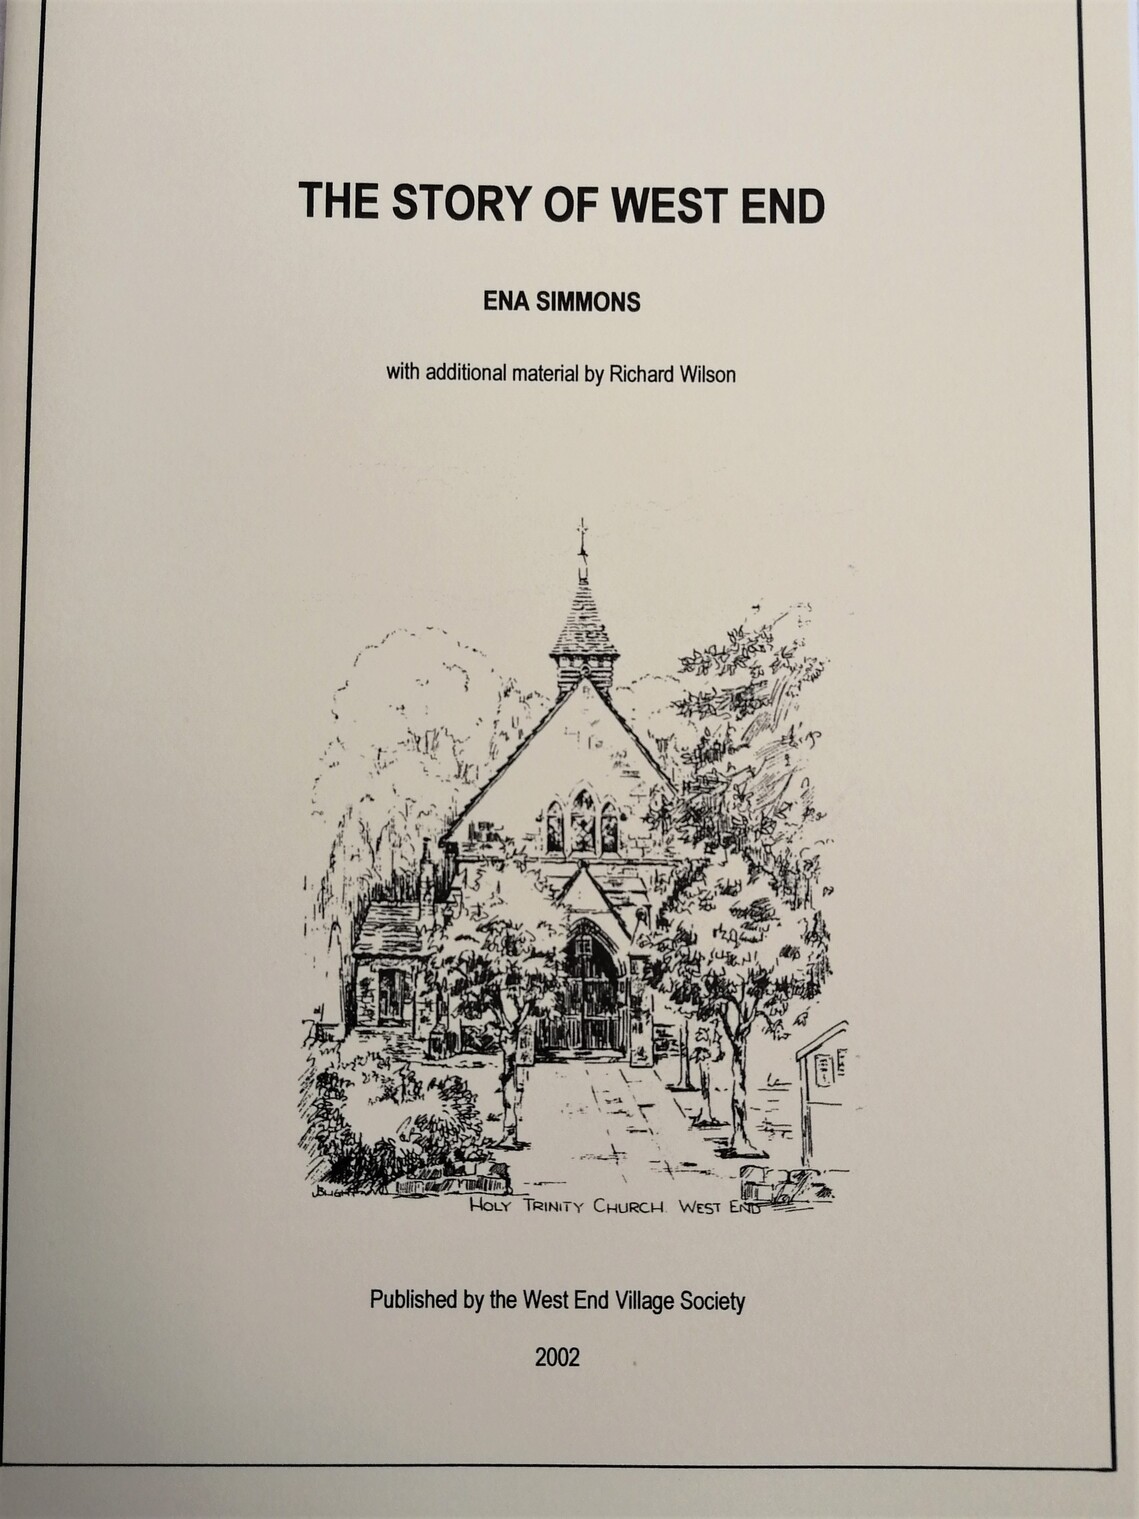 THE STORY OF WEST END